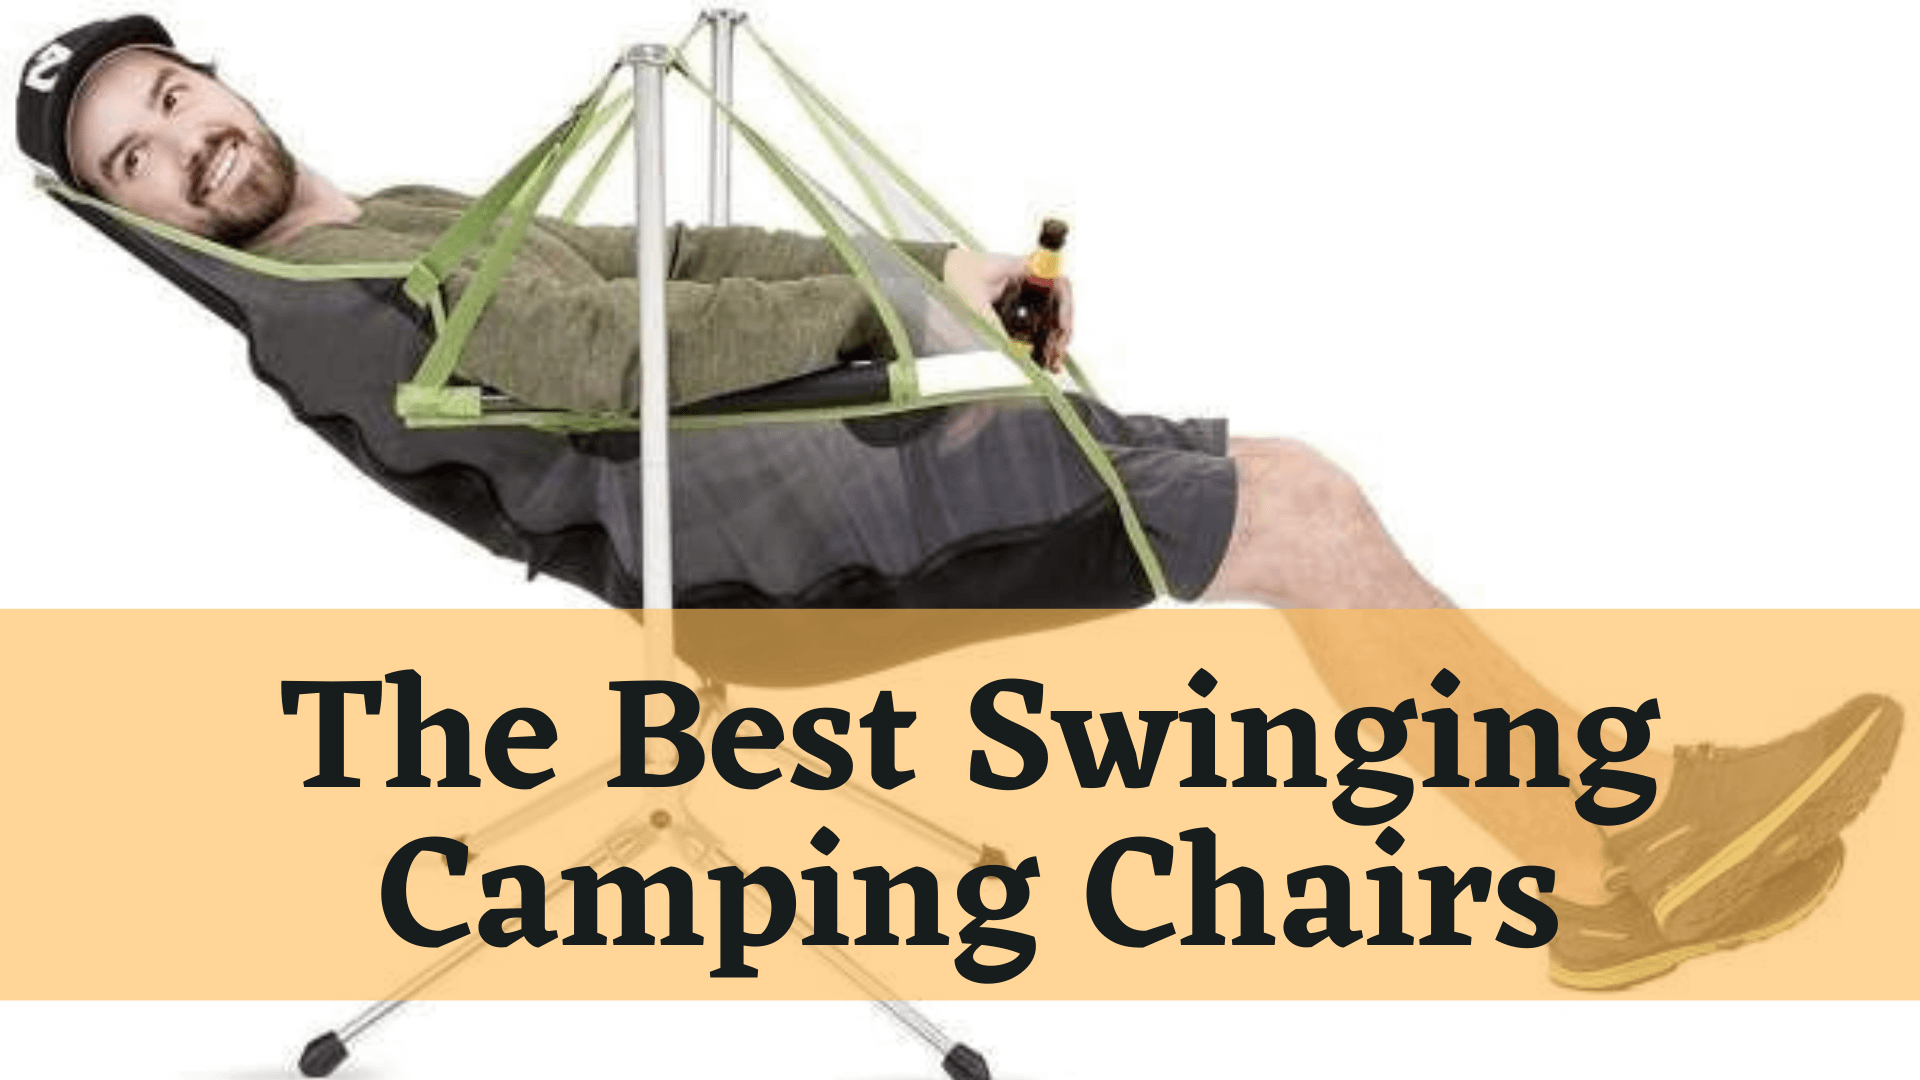 The best swinging camping chairs